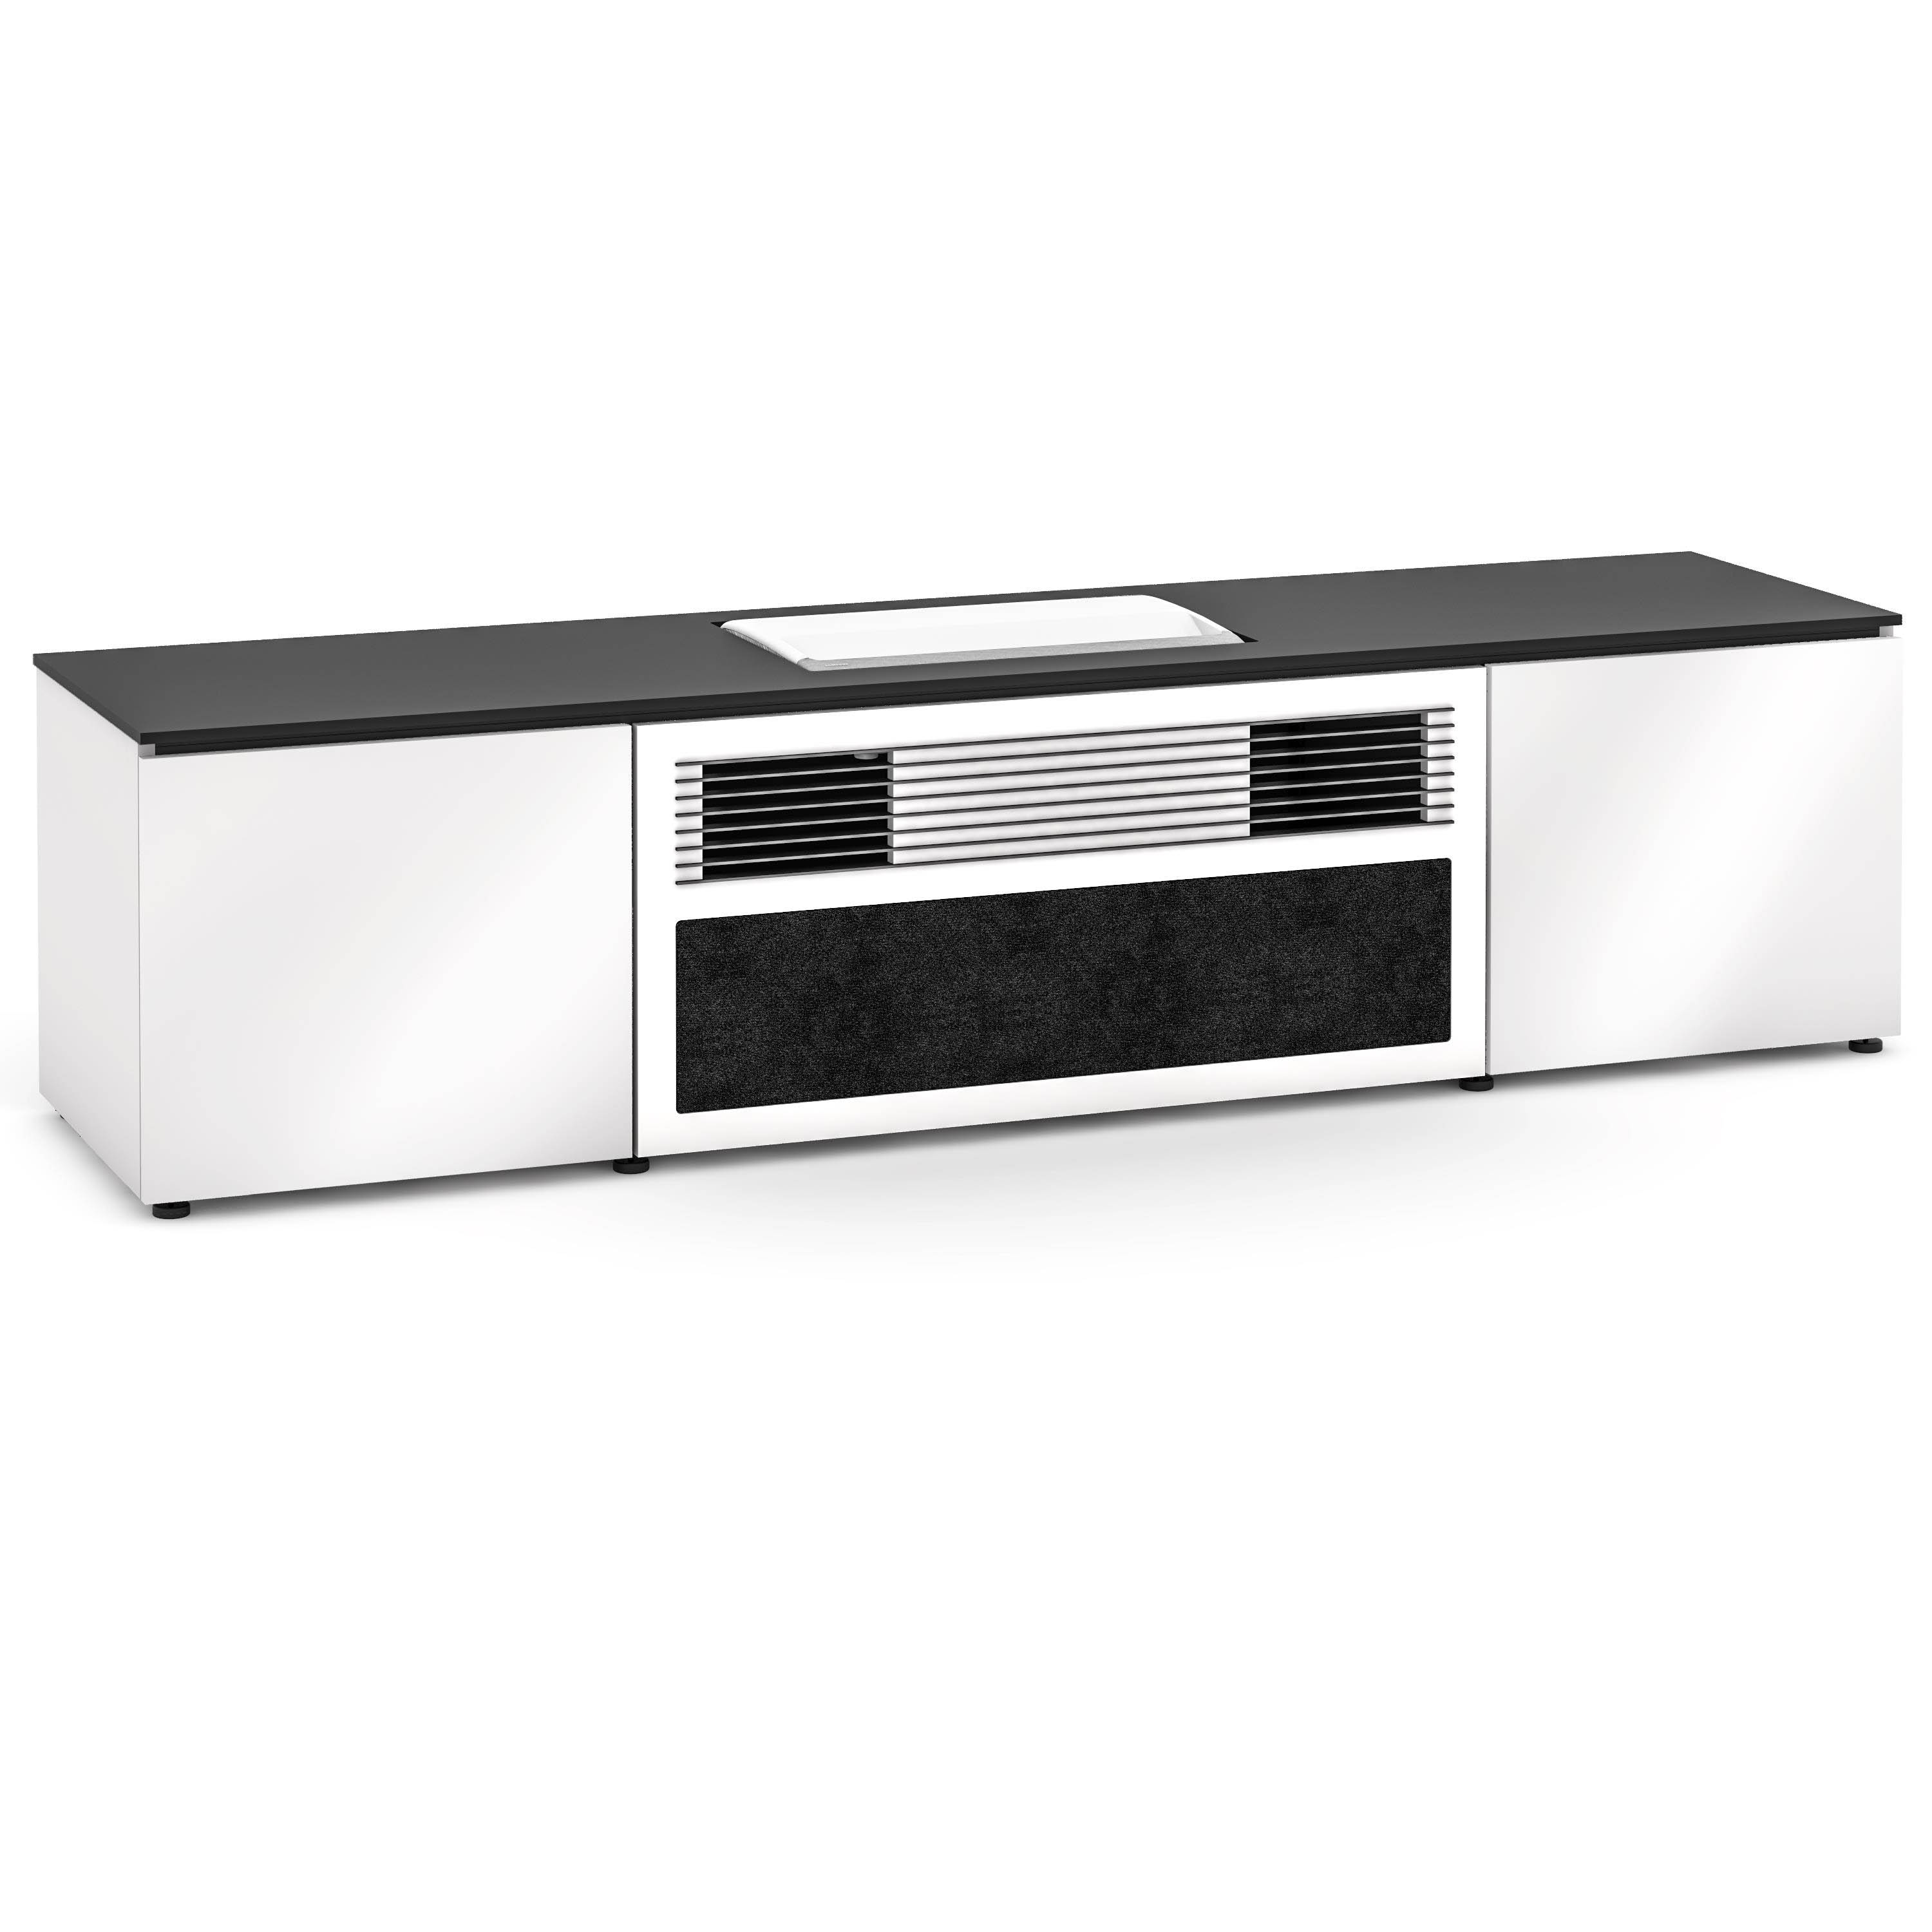 Salamander Designs Miami 245MM Cabinet for integrated Samsung LSP7T UST Projector - Gloss White, Black Top - X/SMG7/245MM/GW